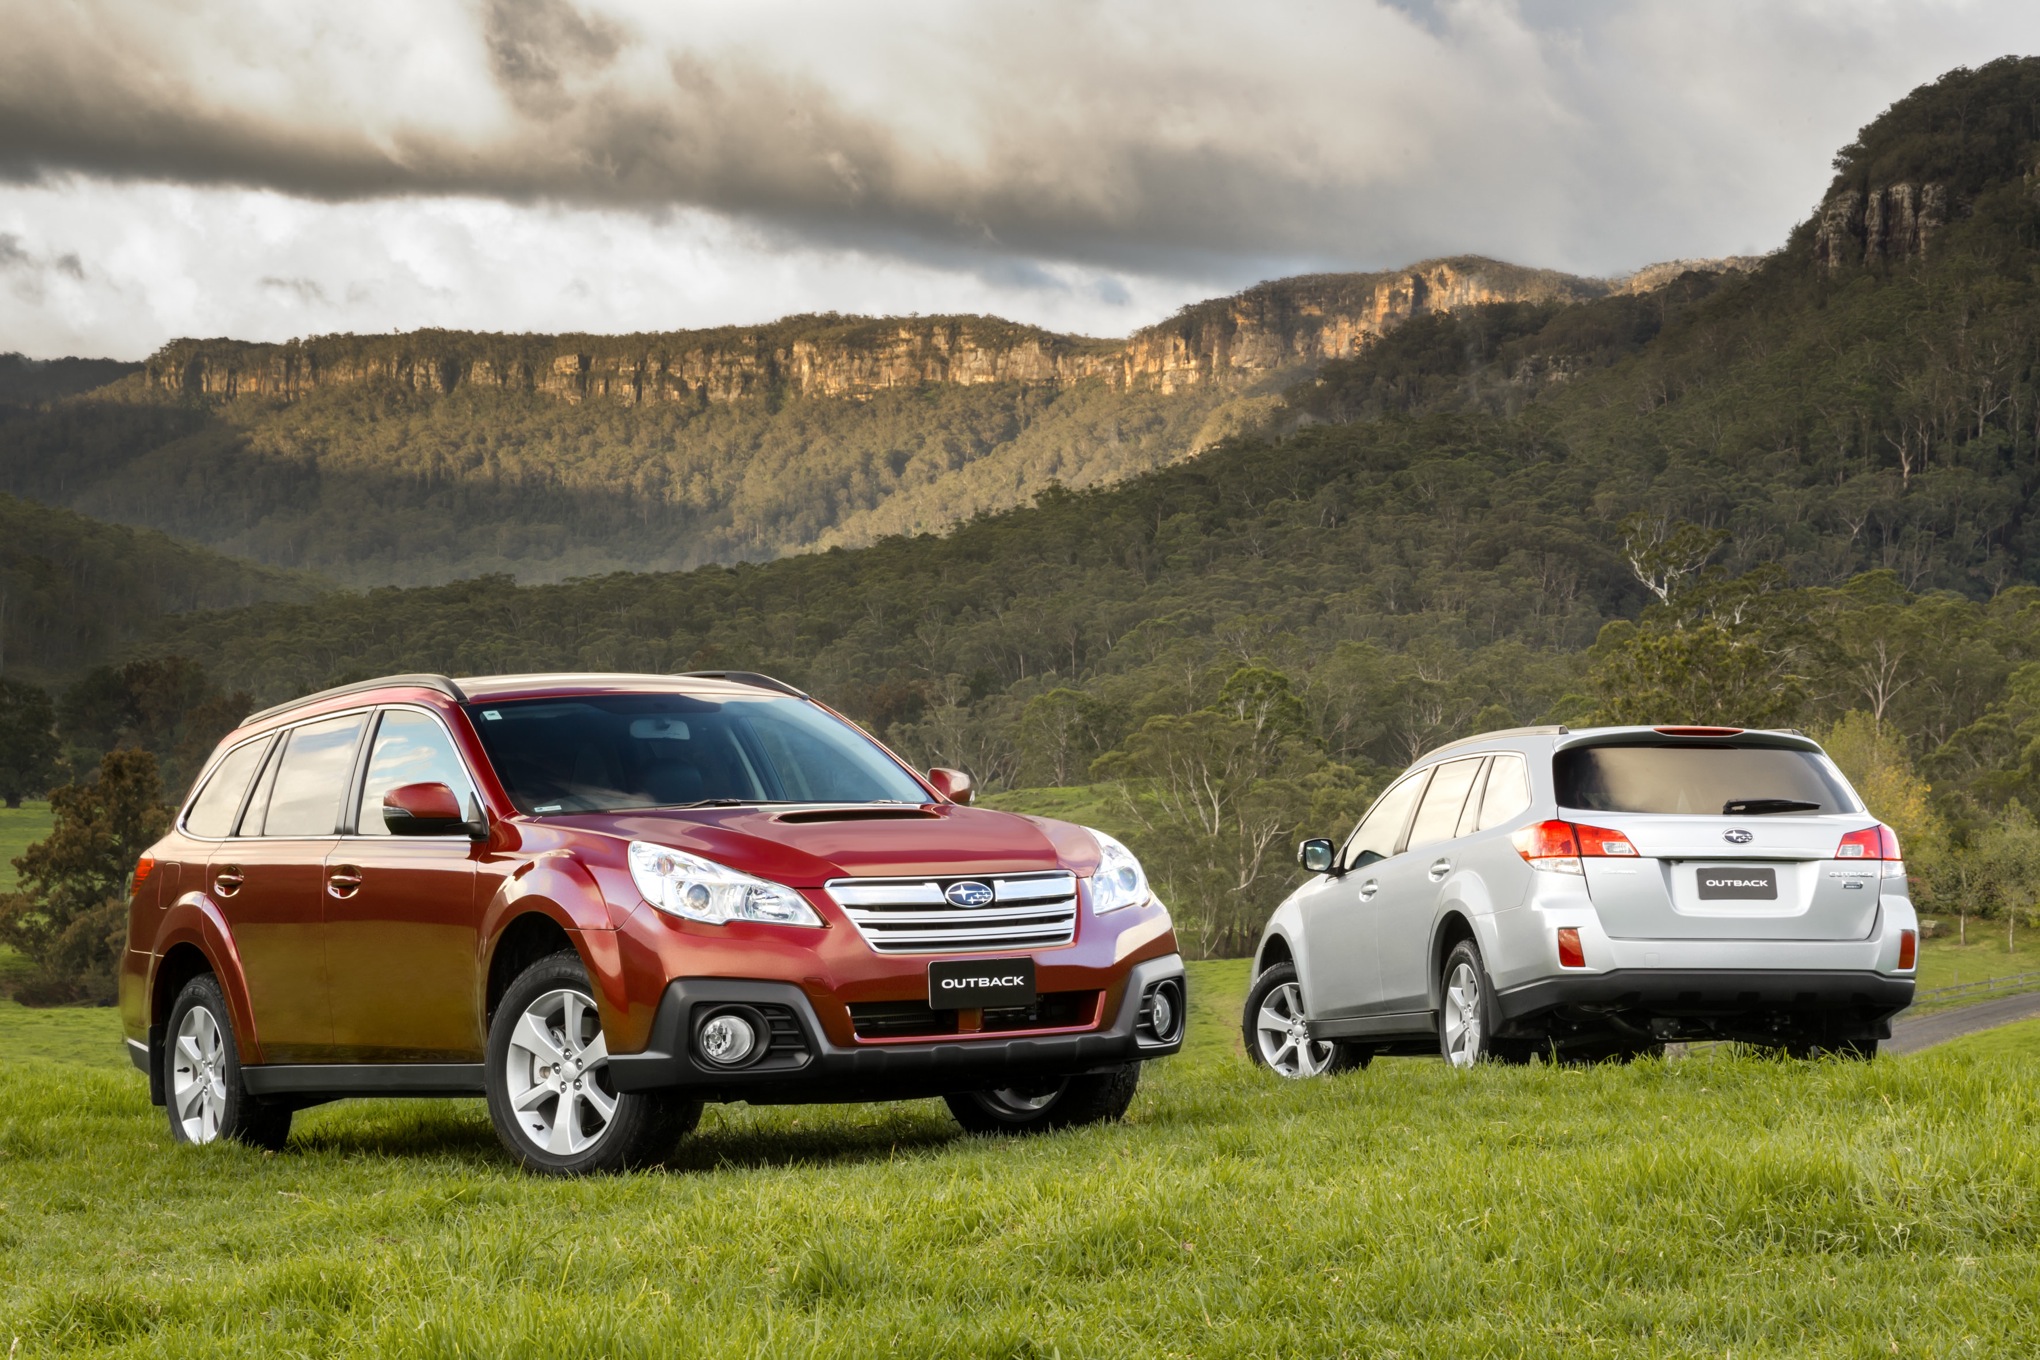 Subaru Outback Diesel Automatic Review photos CarAdvice